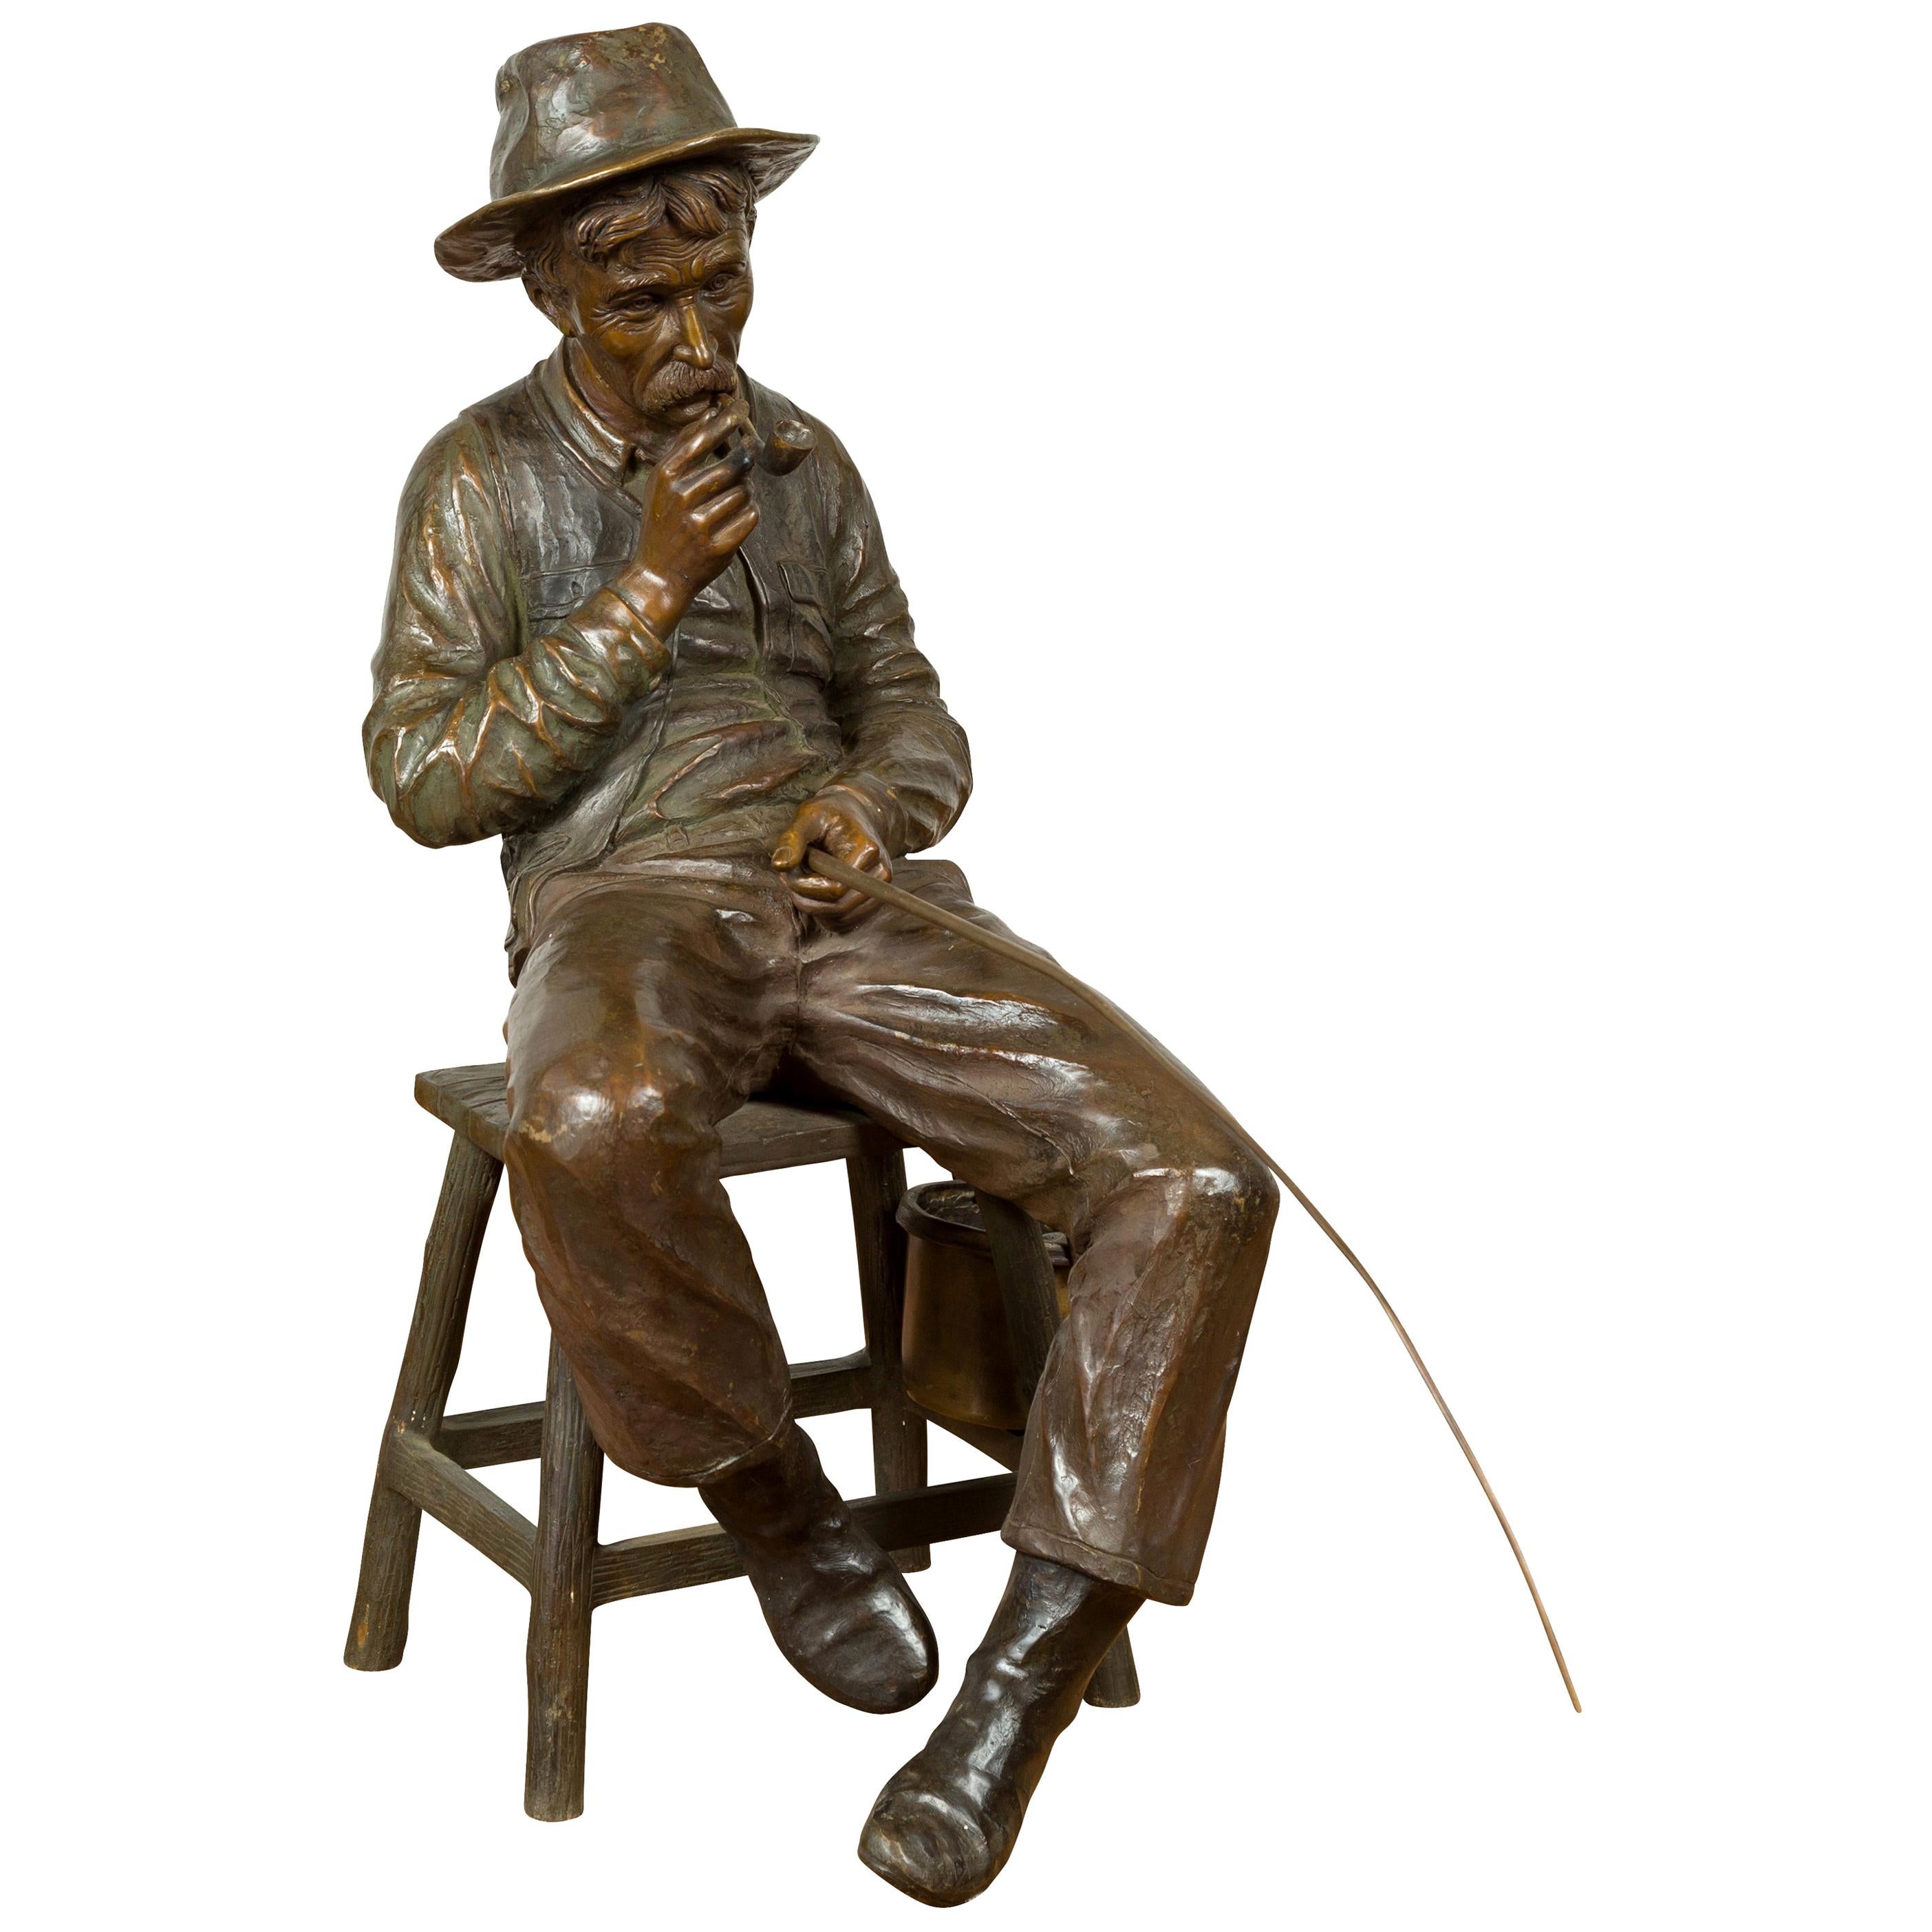 Vintage Bronze Sculpture of a Sitting Old Timer Smoking His Pipe and Fishing